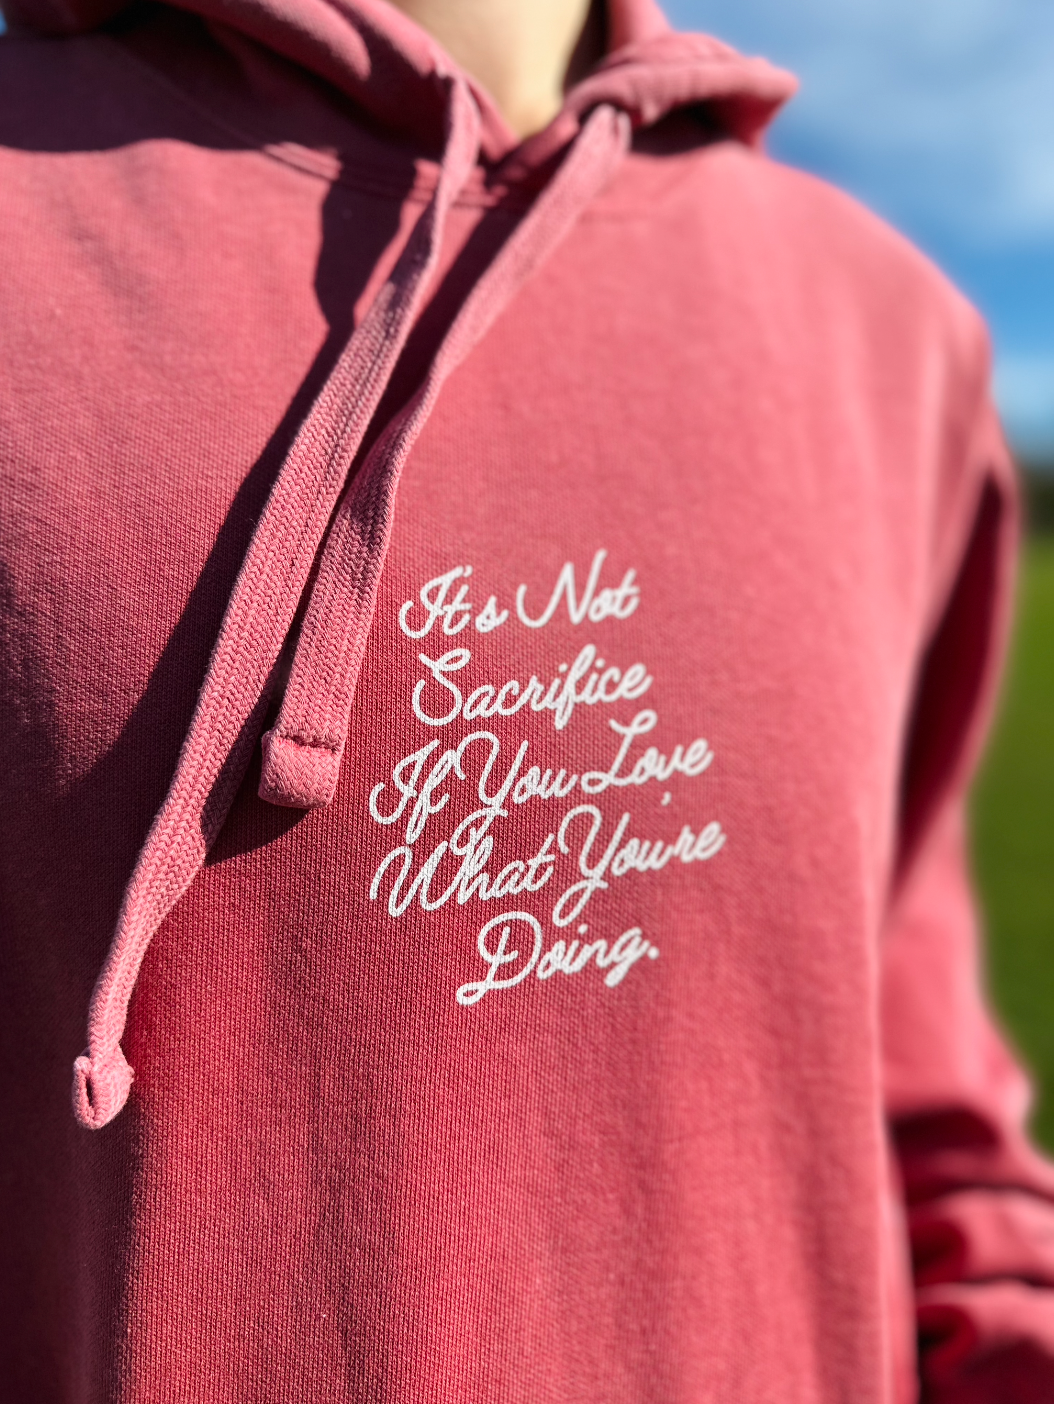 It's Not Sacrifice If You Love What You're Doing Adult Hooded Sweatshirt